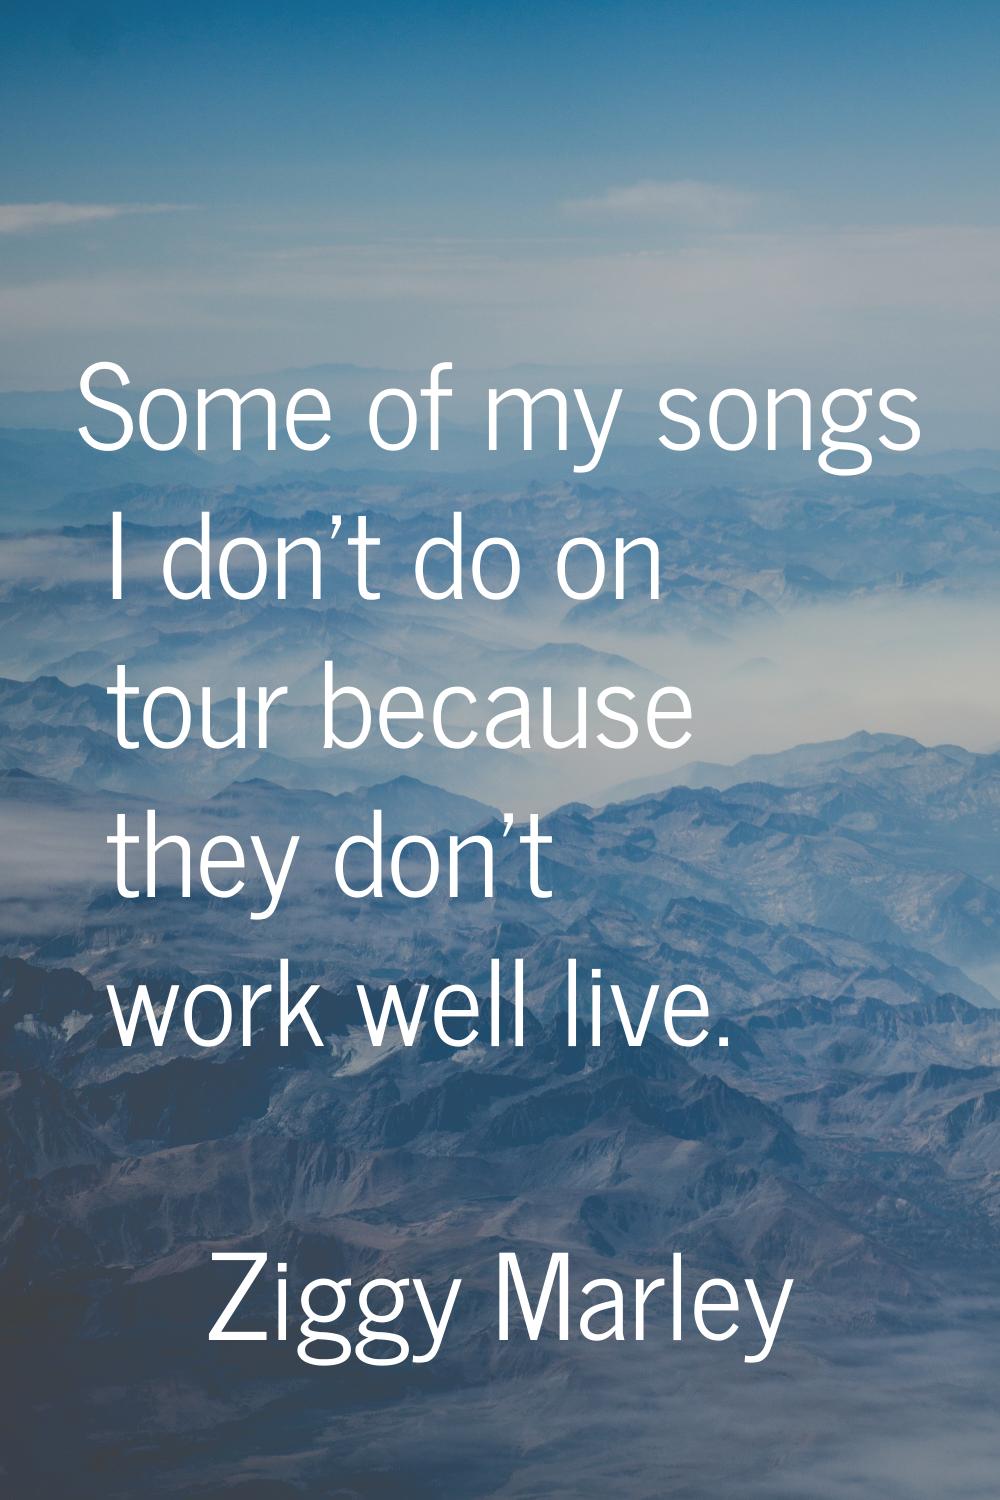 Some of my songs I don't do on tour because they don't work well live.